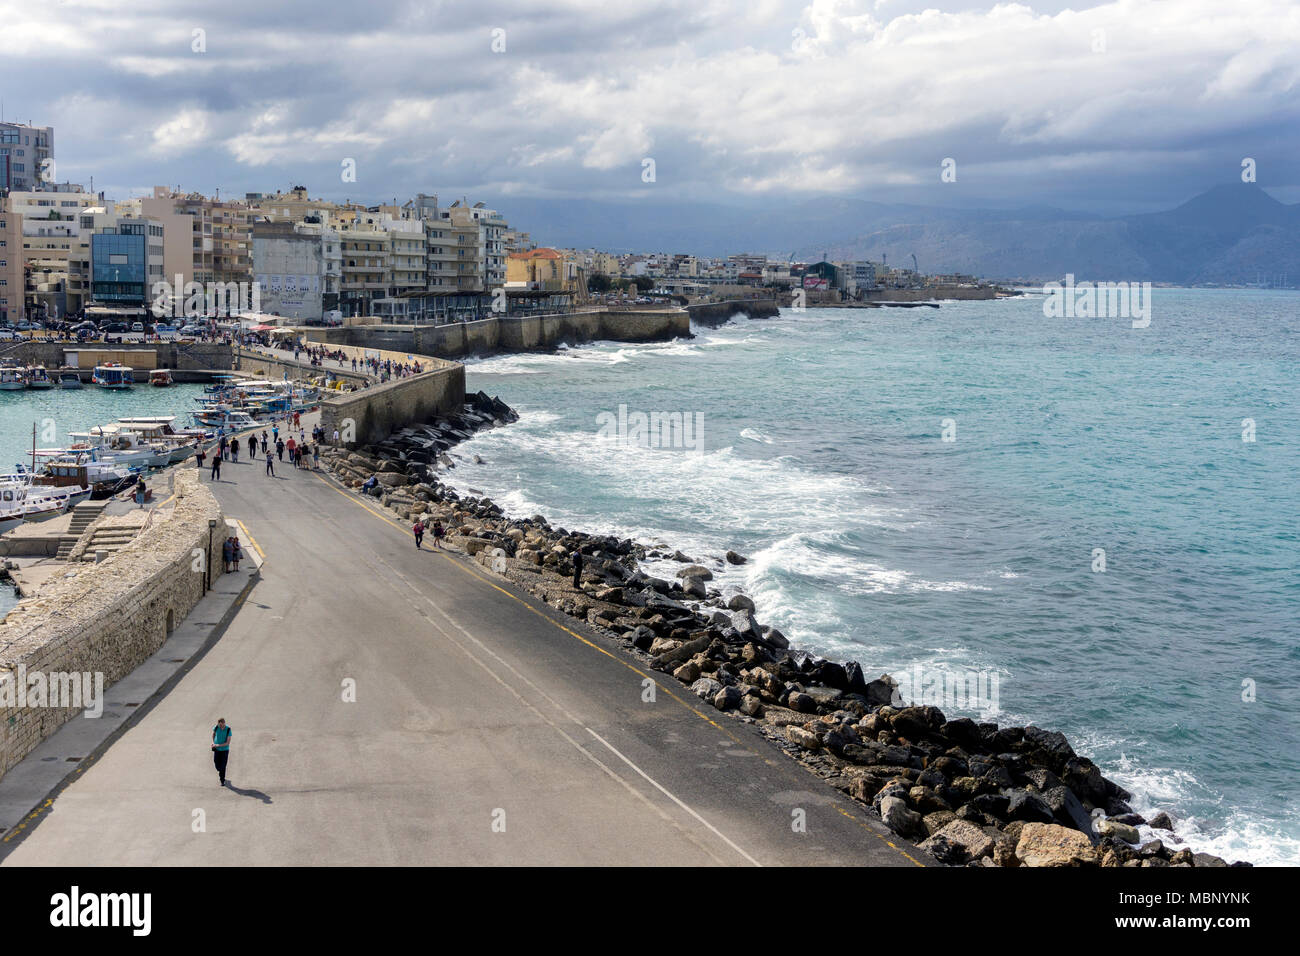 Heraklion, Crete Island - Greece. Panoramic view of Heraklion city from the Venetian fortress Koules (castello a mare) Stock Photo